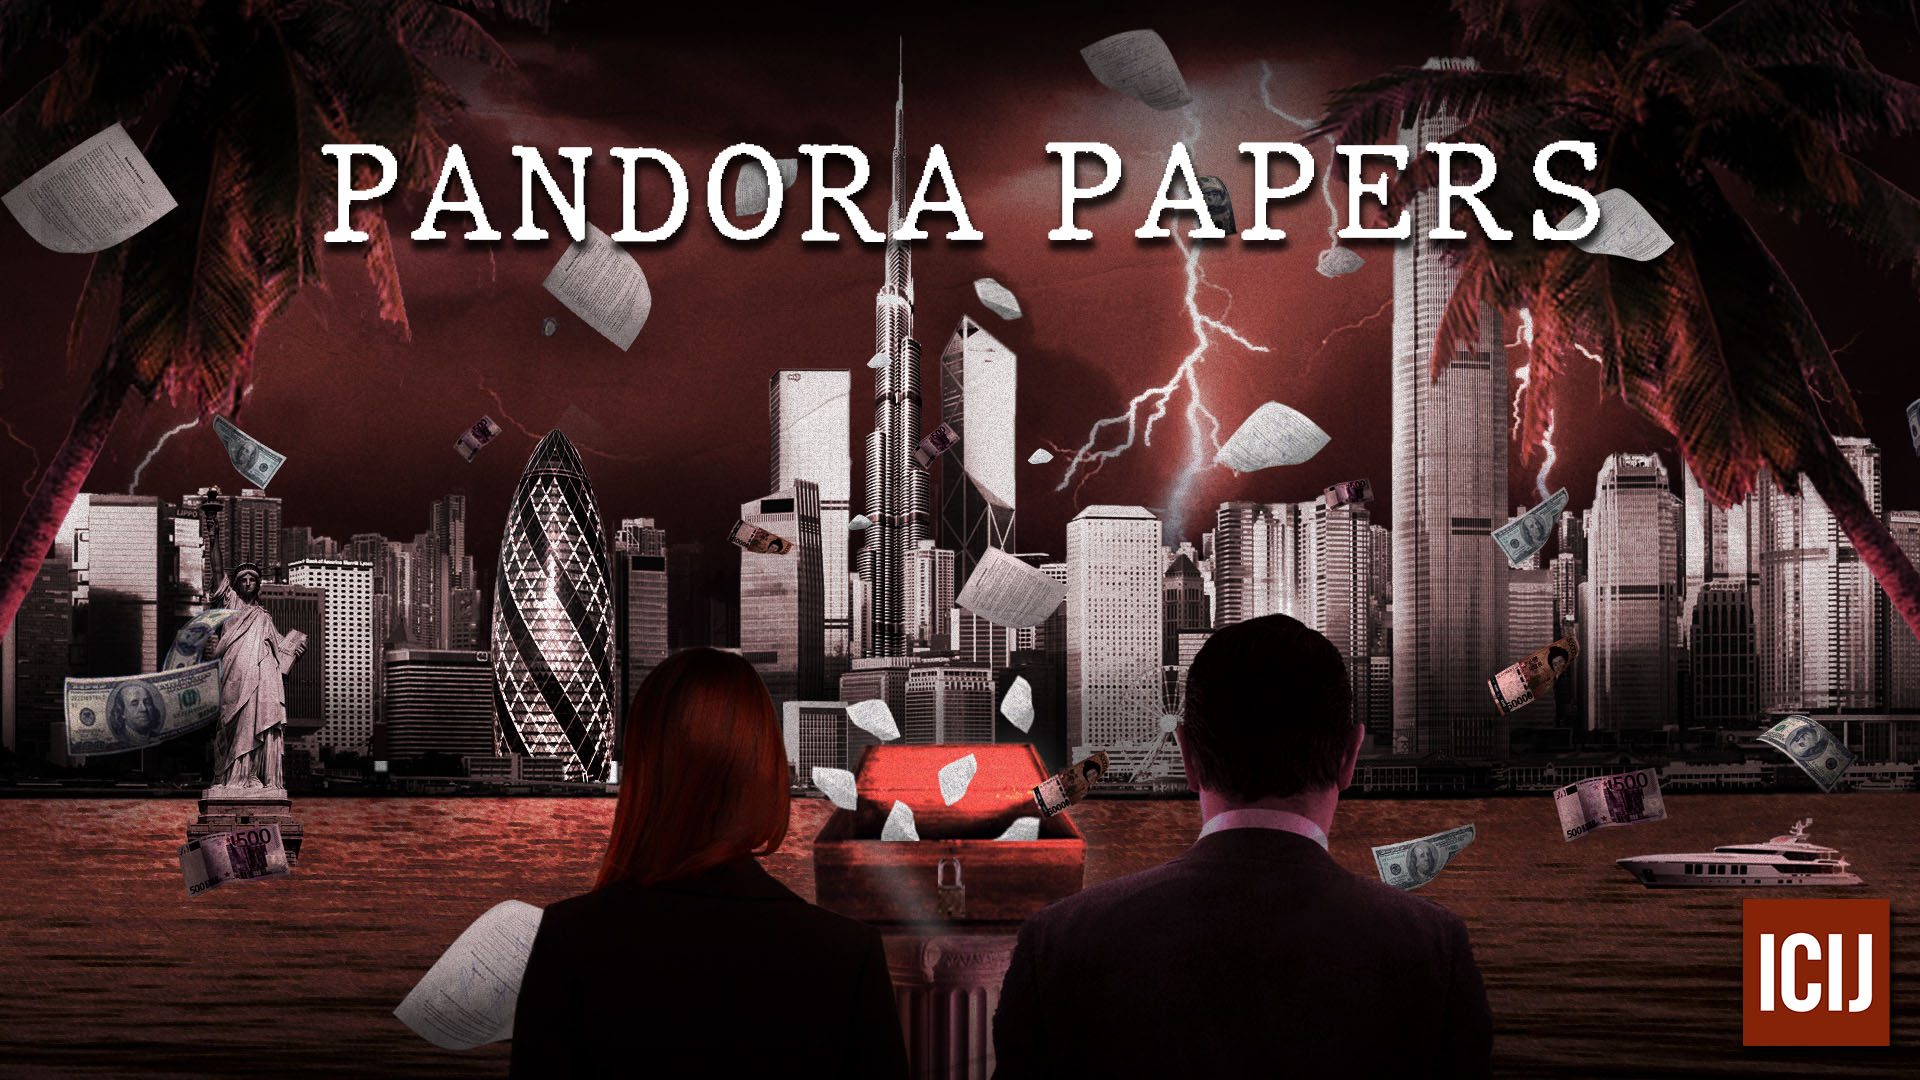 Offshore havens, hidden riches exposed in Pandora Papers leak